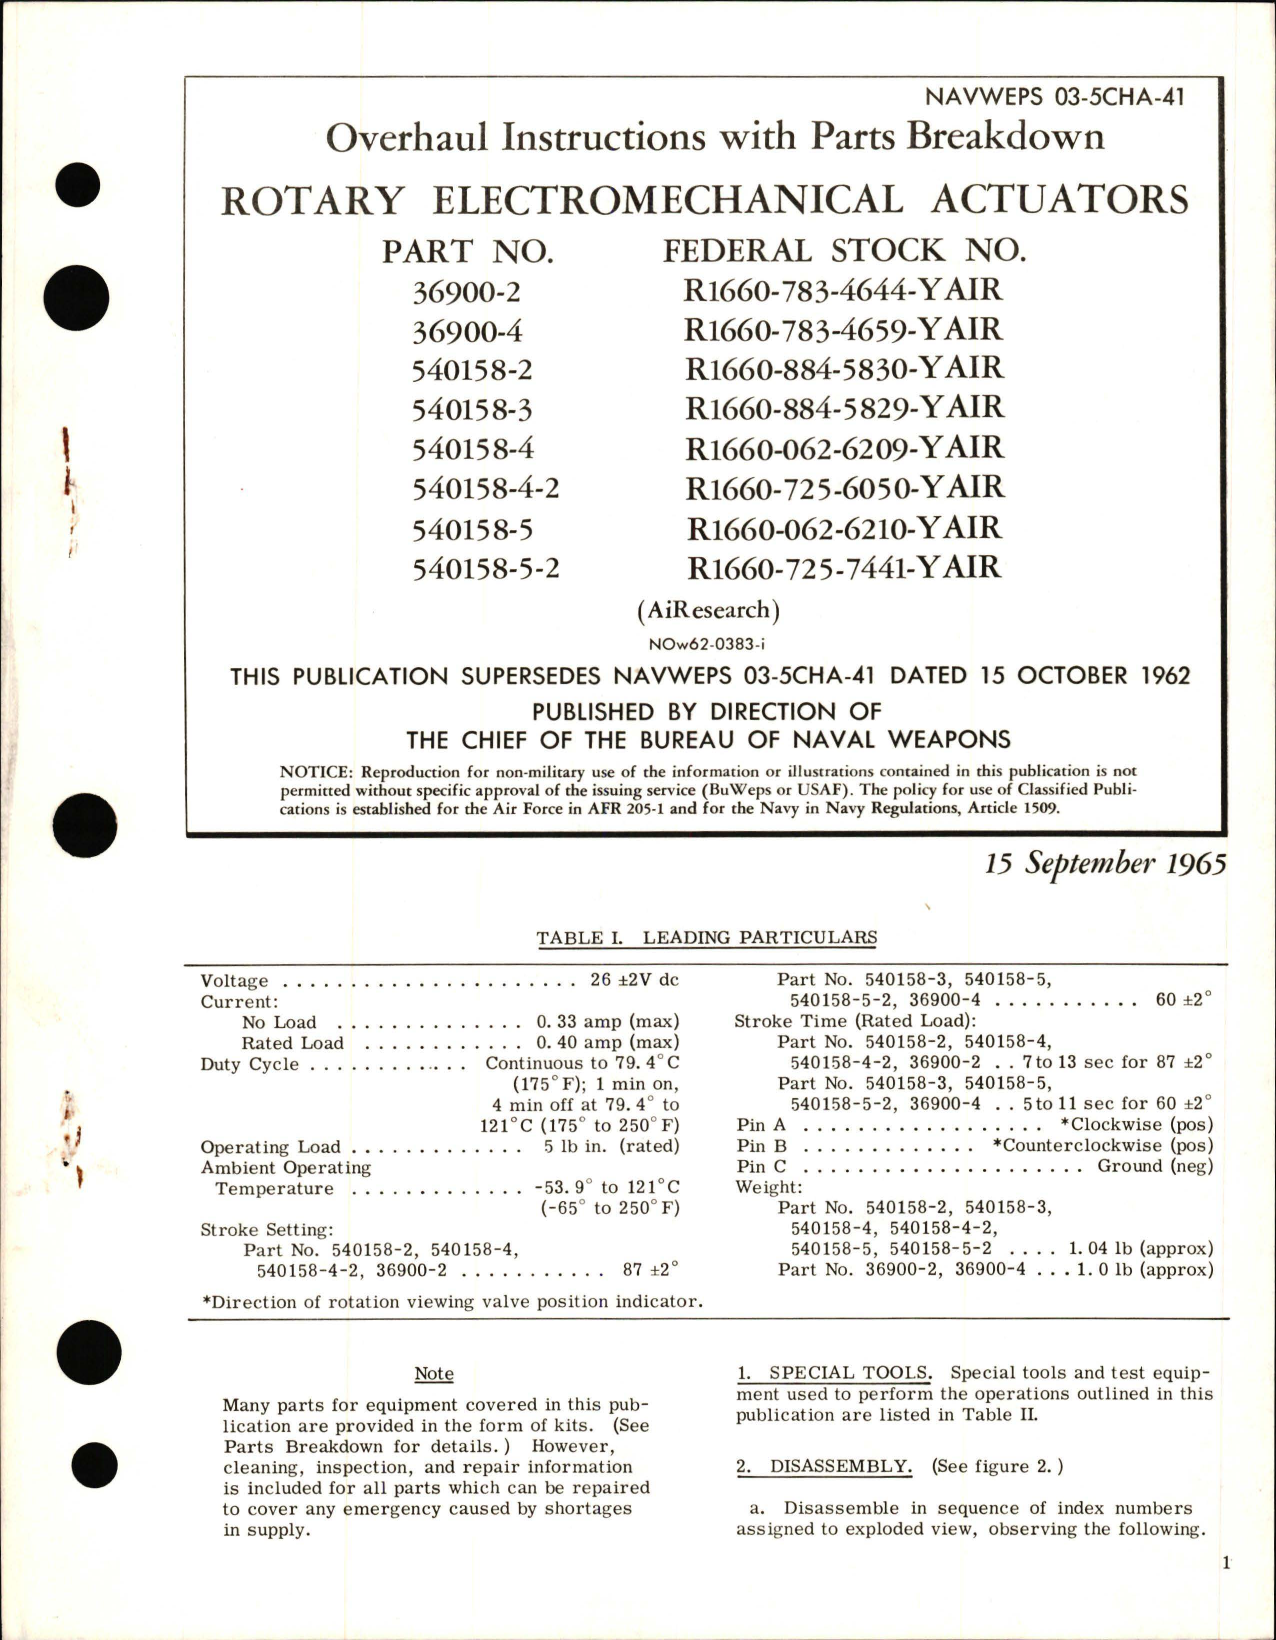 Sample page 1 from AirCorps Library document: Overhaul Instructions with Parts Breakdown for Rotary Electromechanical Actuators 